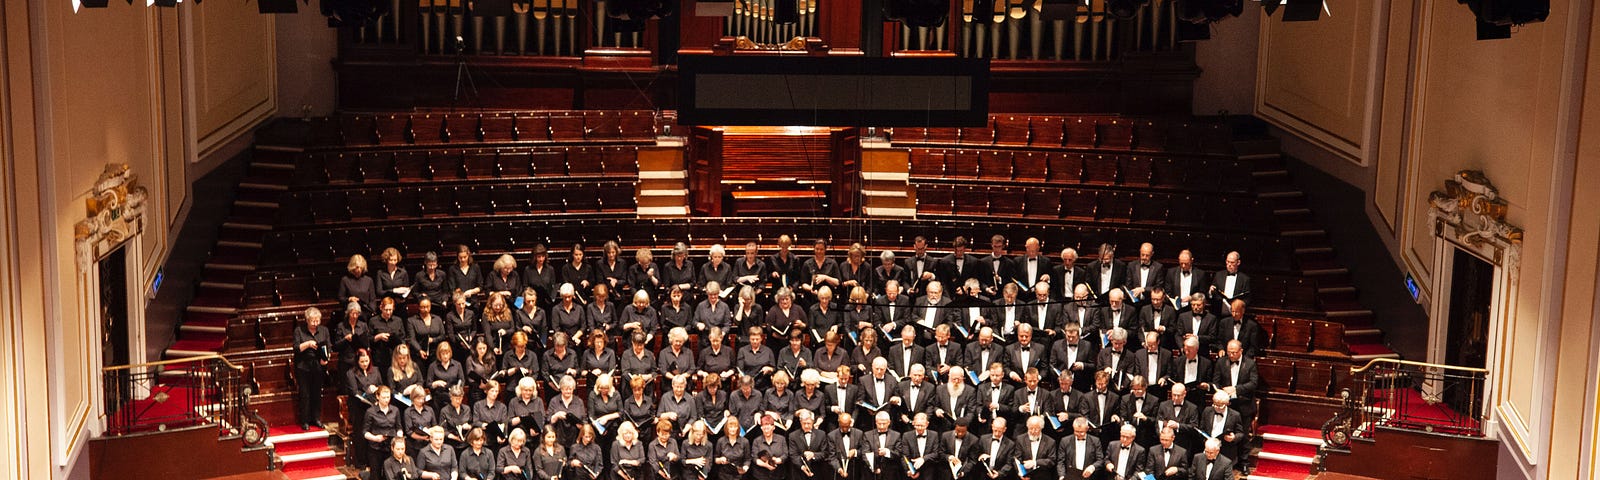 A symphony in a large concert hall with a choir standing behind. Photo presumbaly taken from a balcony in the audience seats.